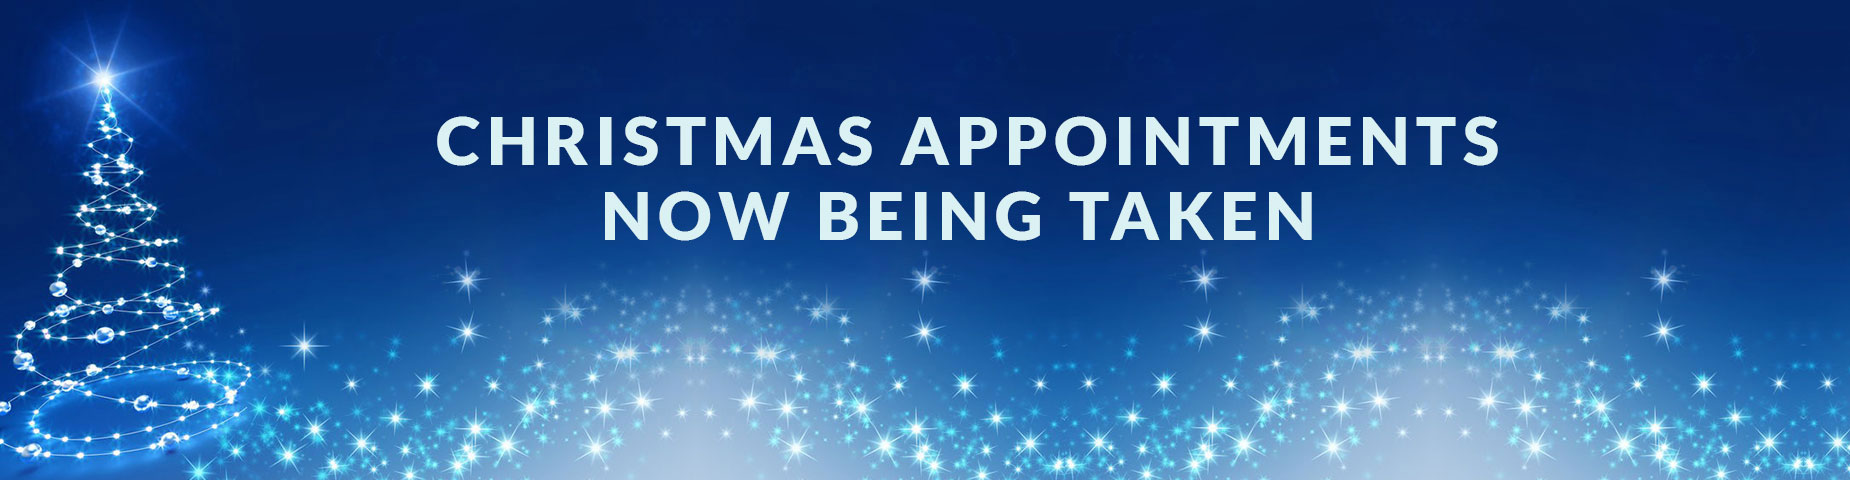 Christmas Appointments Now Being Taken at The Cutting Studio Hair Salon in High Wycombe